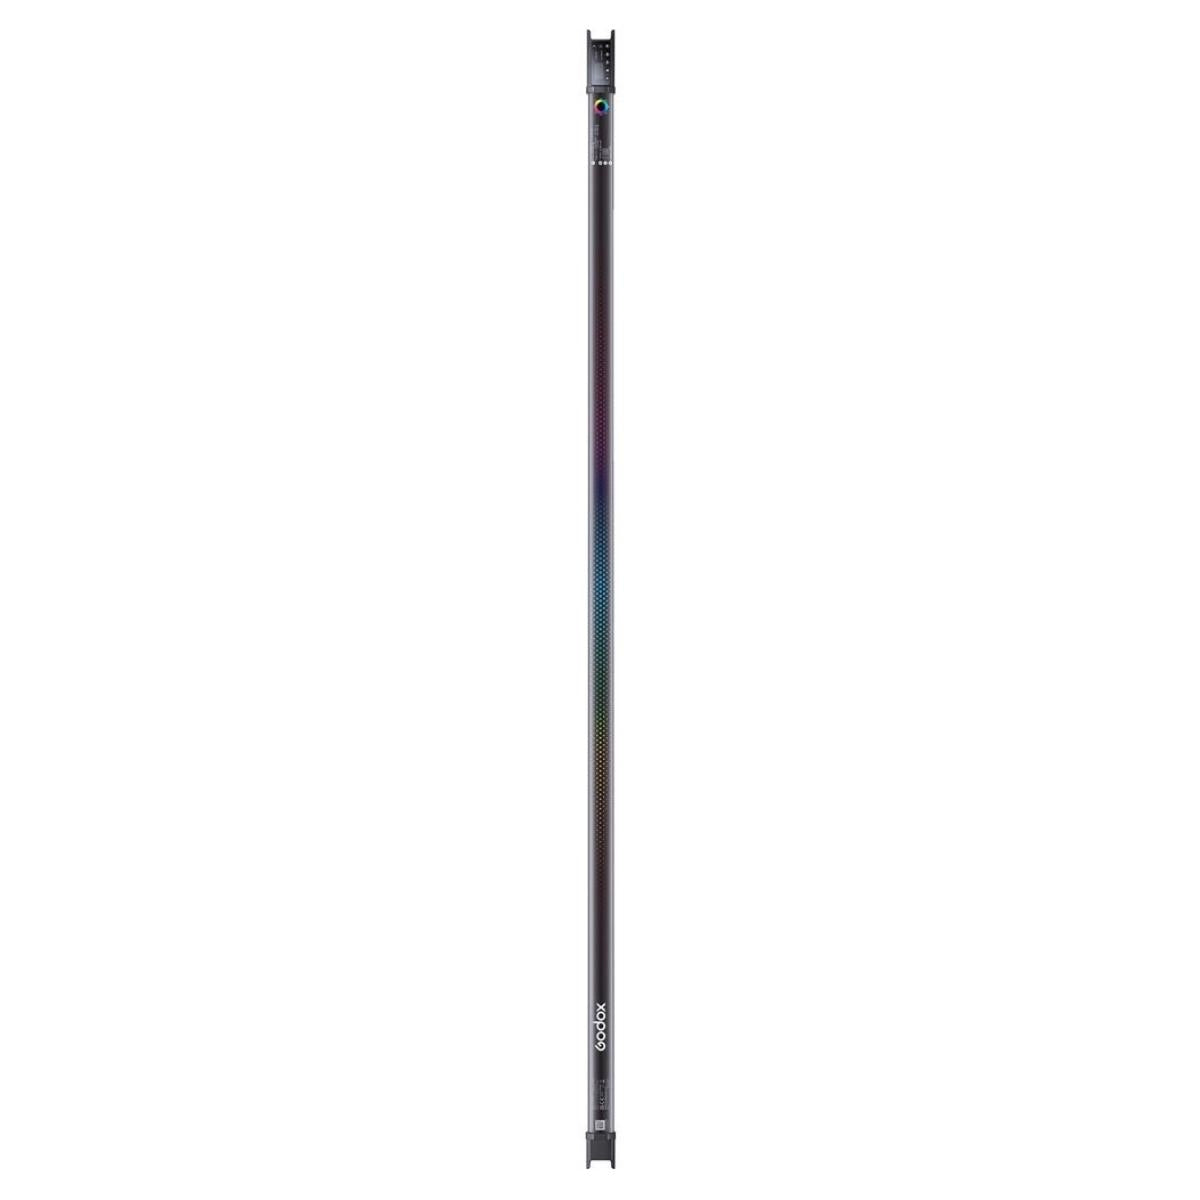 Godox TL180 55W 180cm RGB Bi-Color LED Tube Light Stick with 2700-6500K Color Temperature, Built-in Battery & Effects, Bluetooth / Remote Control